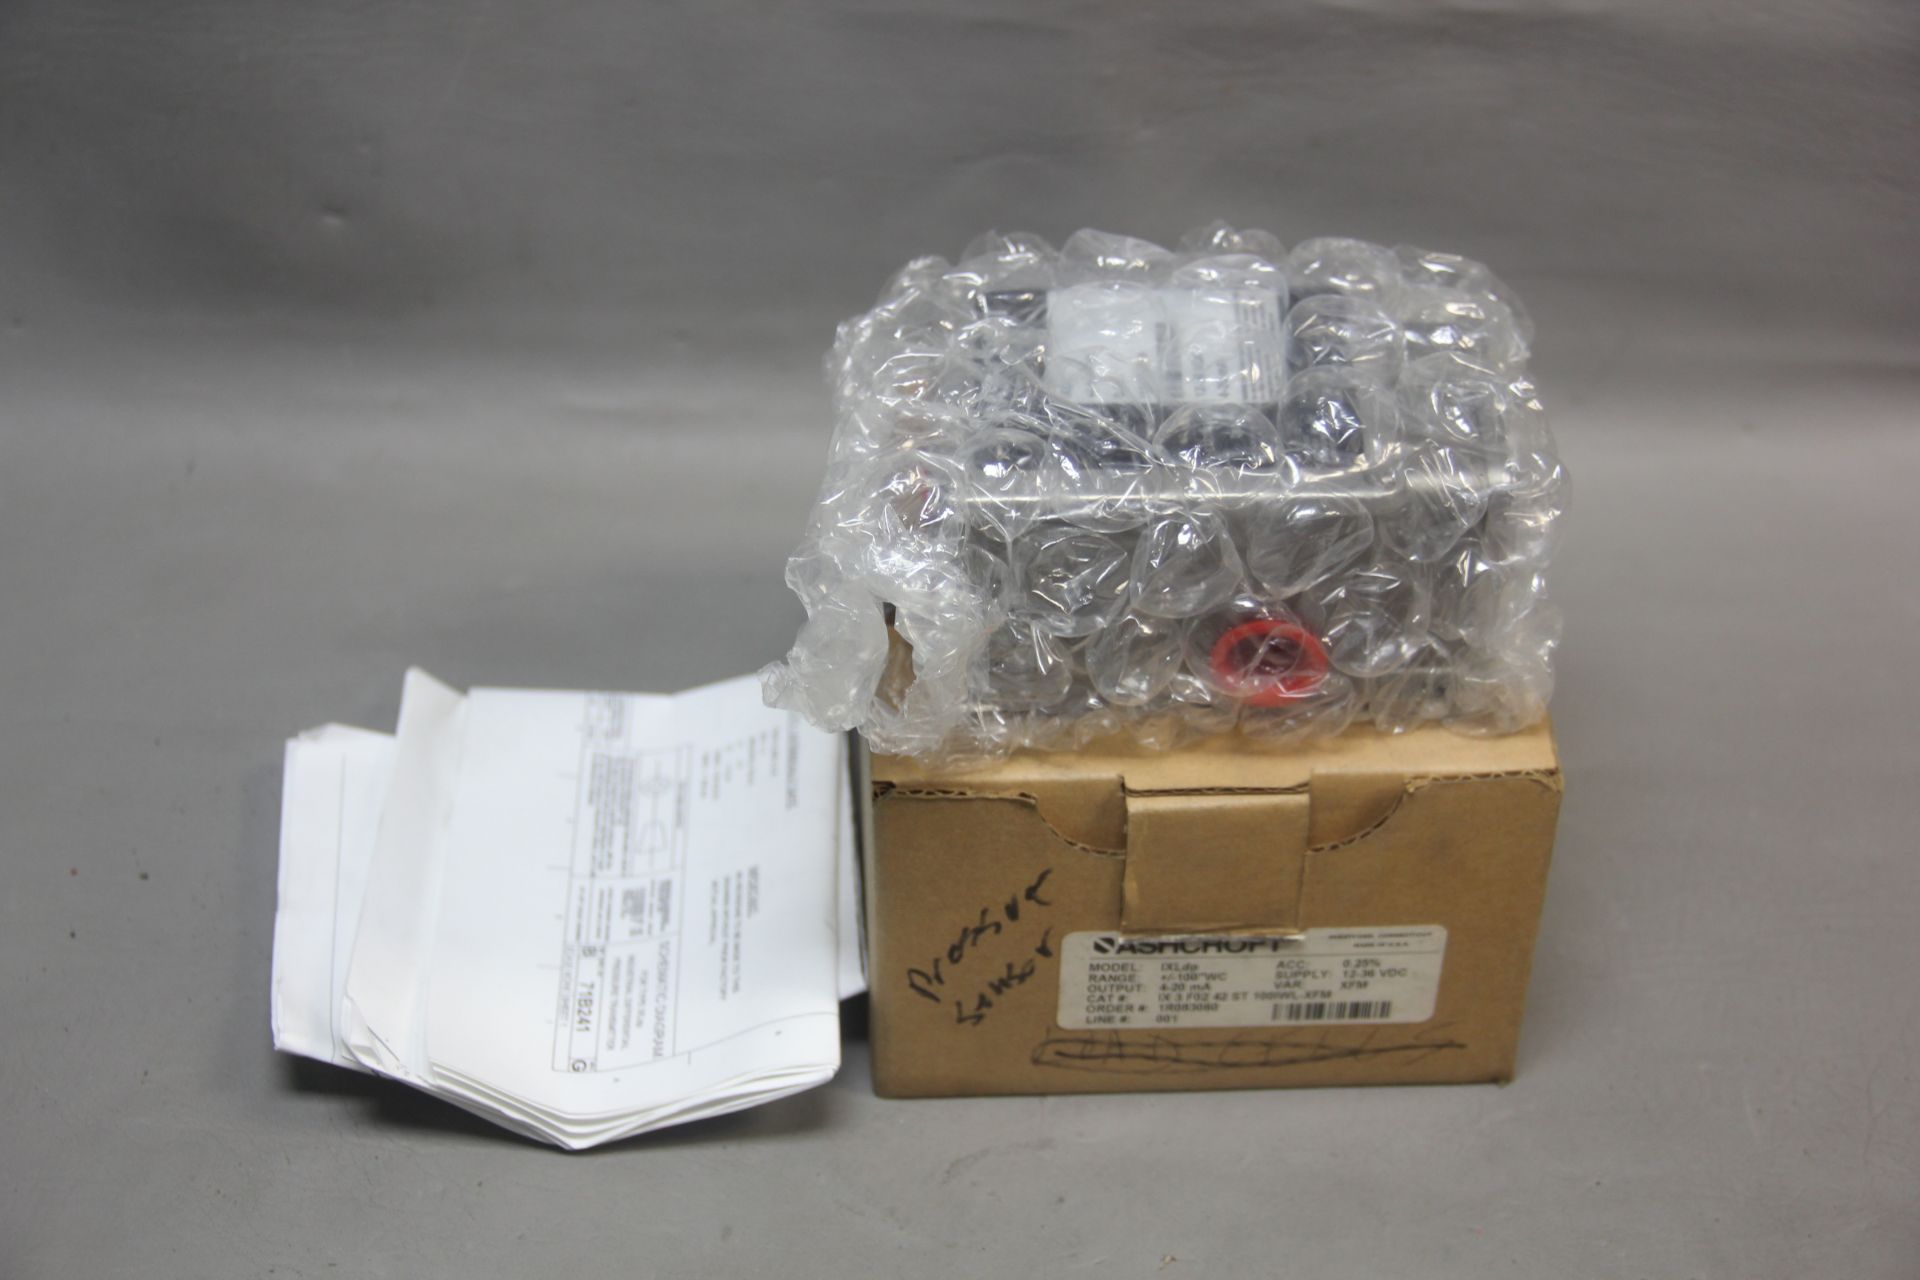 NEW ASHCROFT DIFFERENTIAL PRESSURE TRANSMITTER